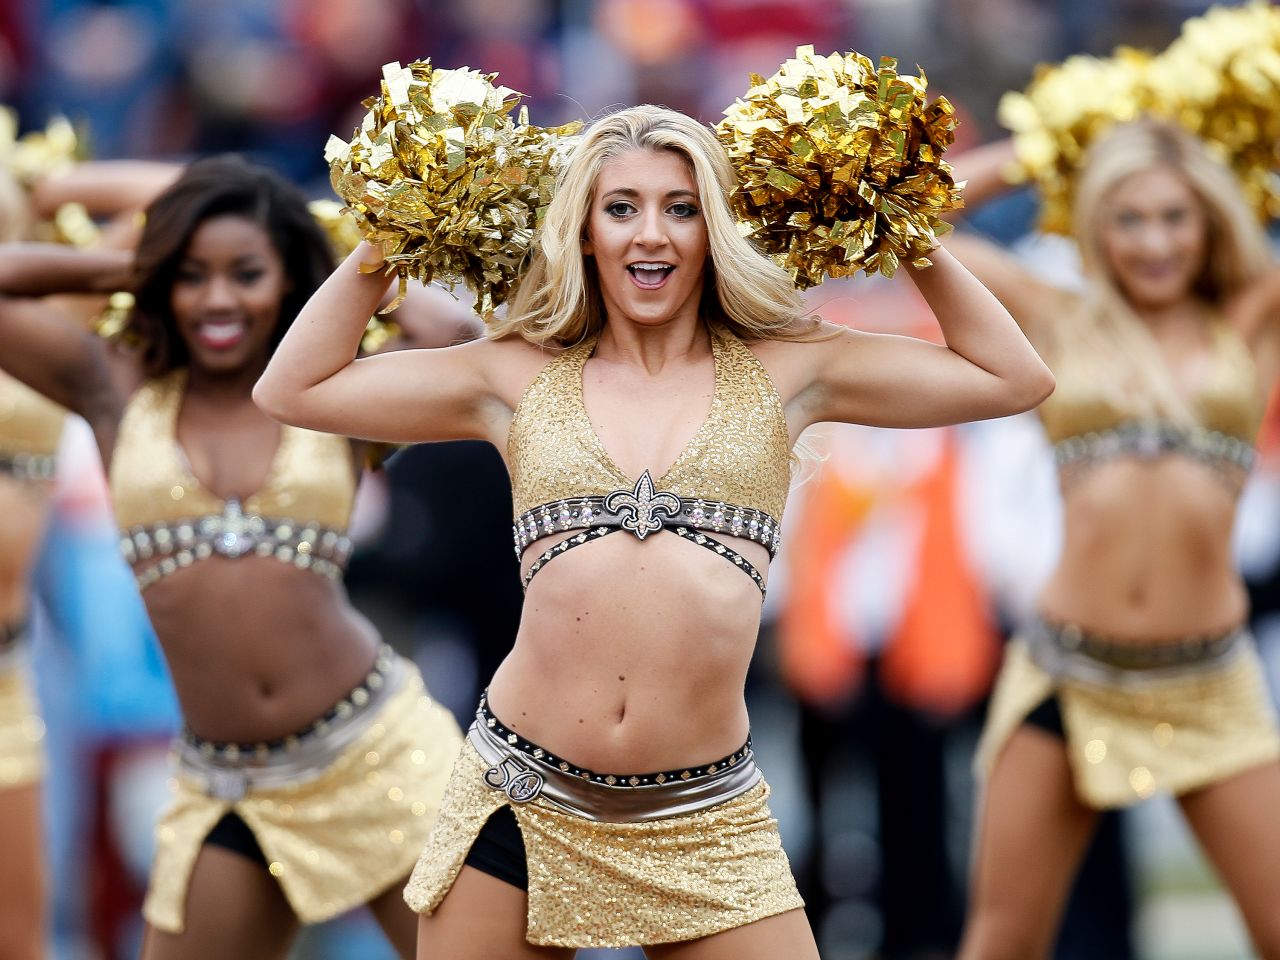 The New Orleans Saintsations team in 2016.